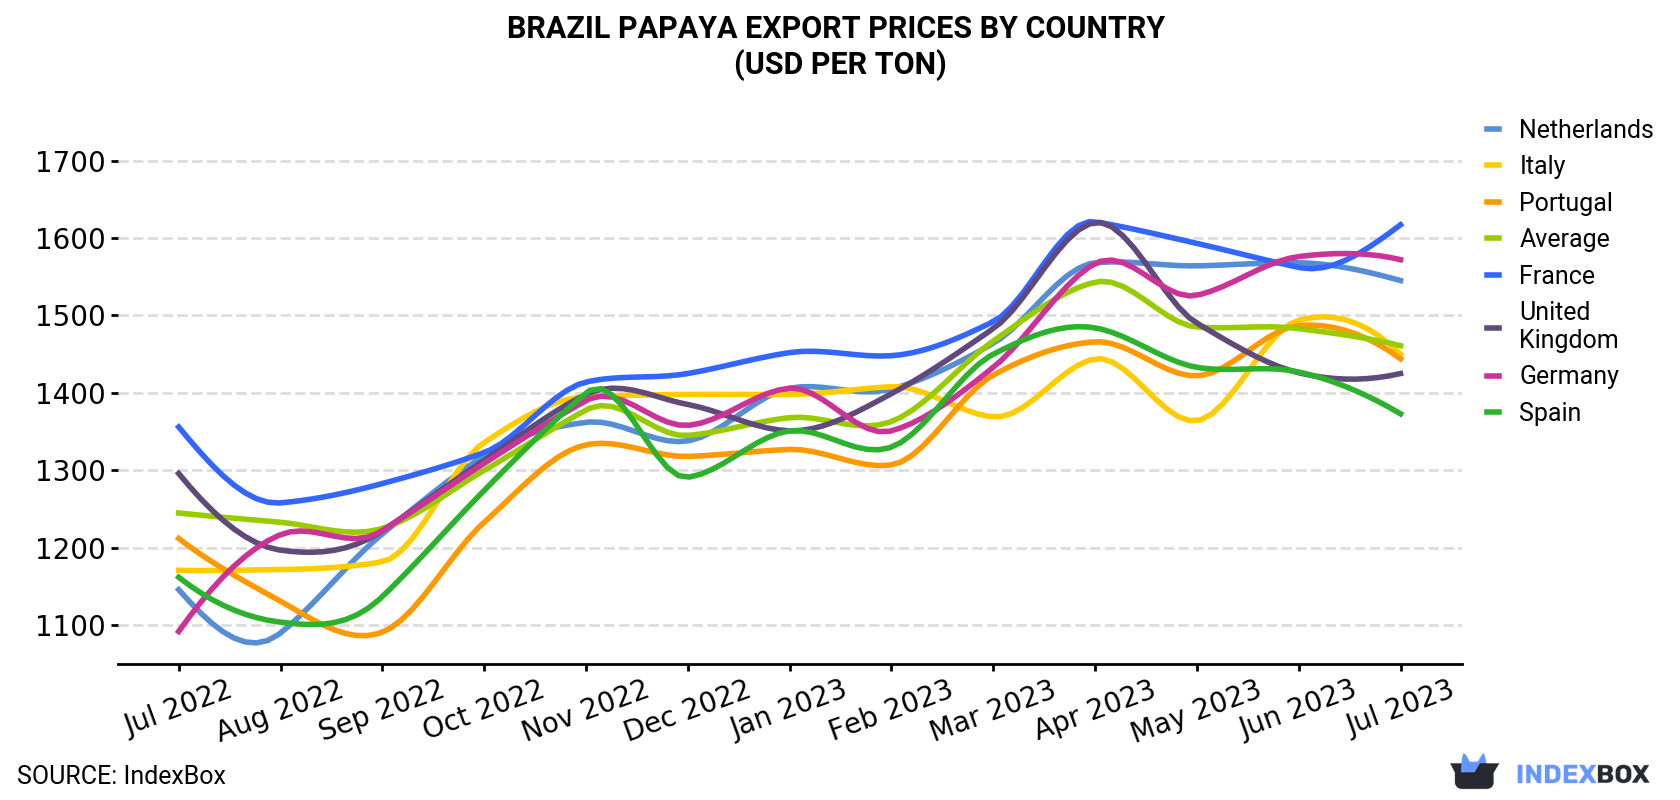 Brazil Papaya Export Prices By Country (USD Per Ton)